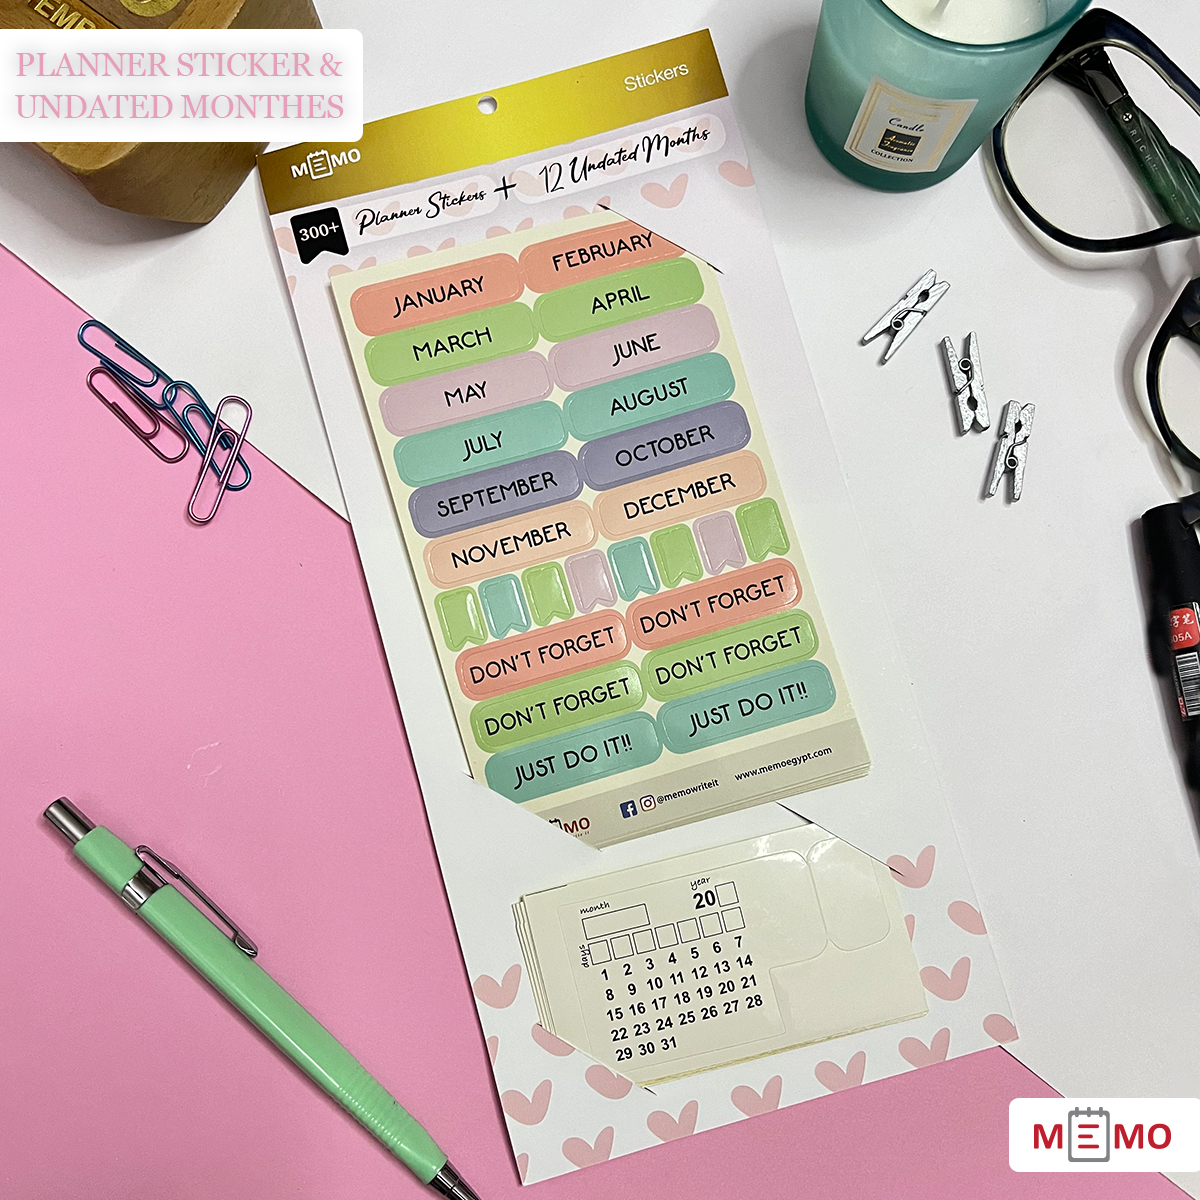 Memo Planner Stickers & 12 Undated Months-2nd-img